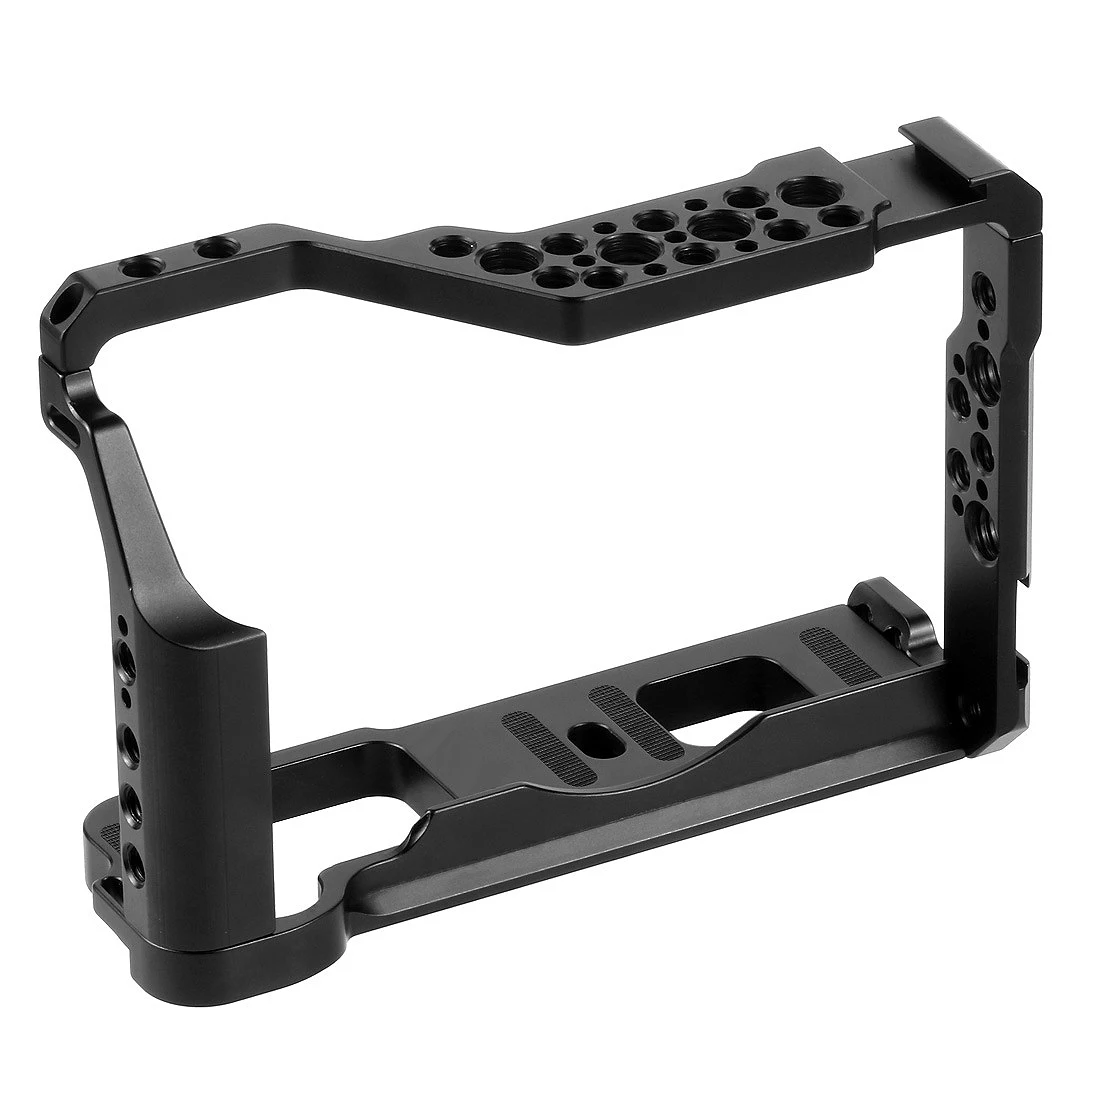 

Aluminum Alloy Camera Cage for Fujifilm X-T3 / X-T2 DSLR Photography Stabilizer Rig Protective Cage